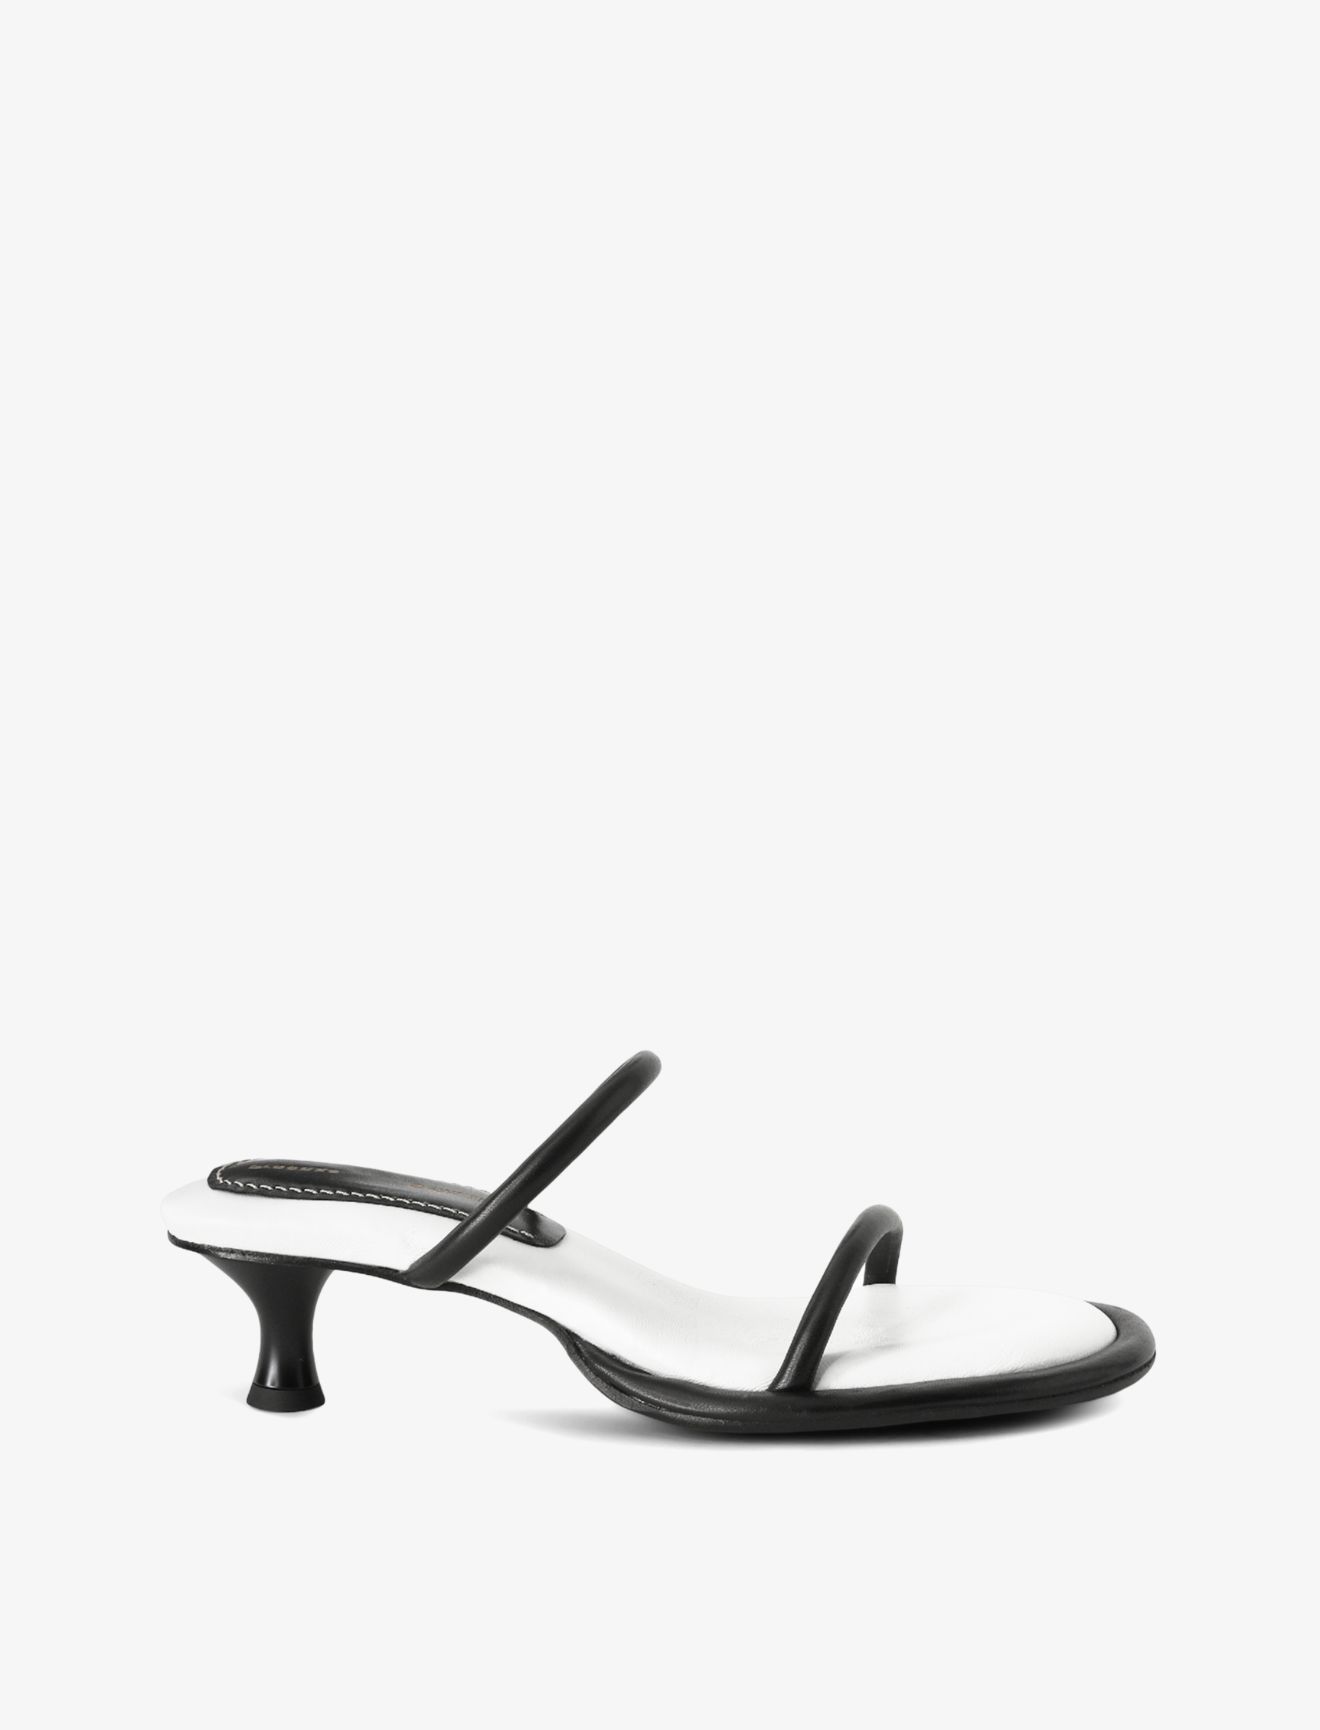 Pipe Strappy Sandals black | Schouler